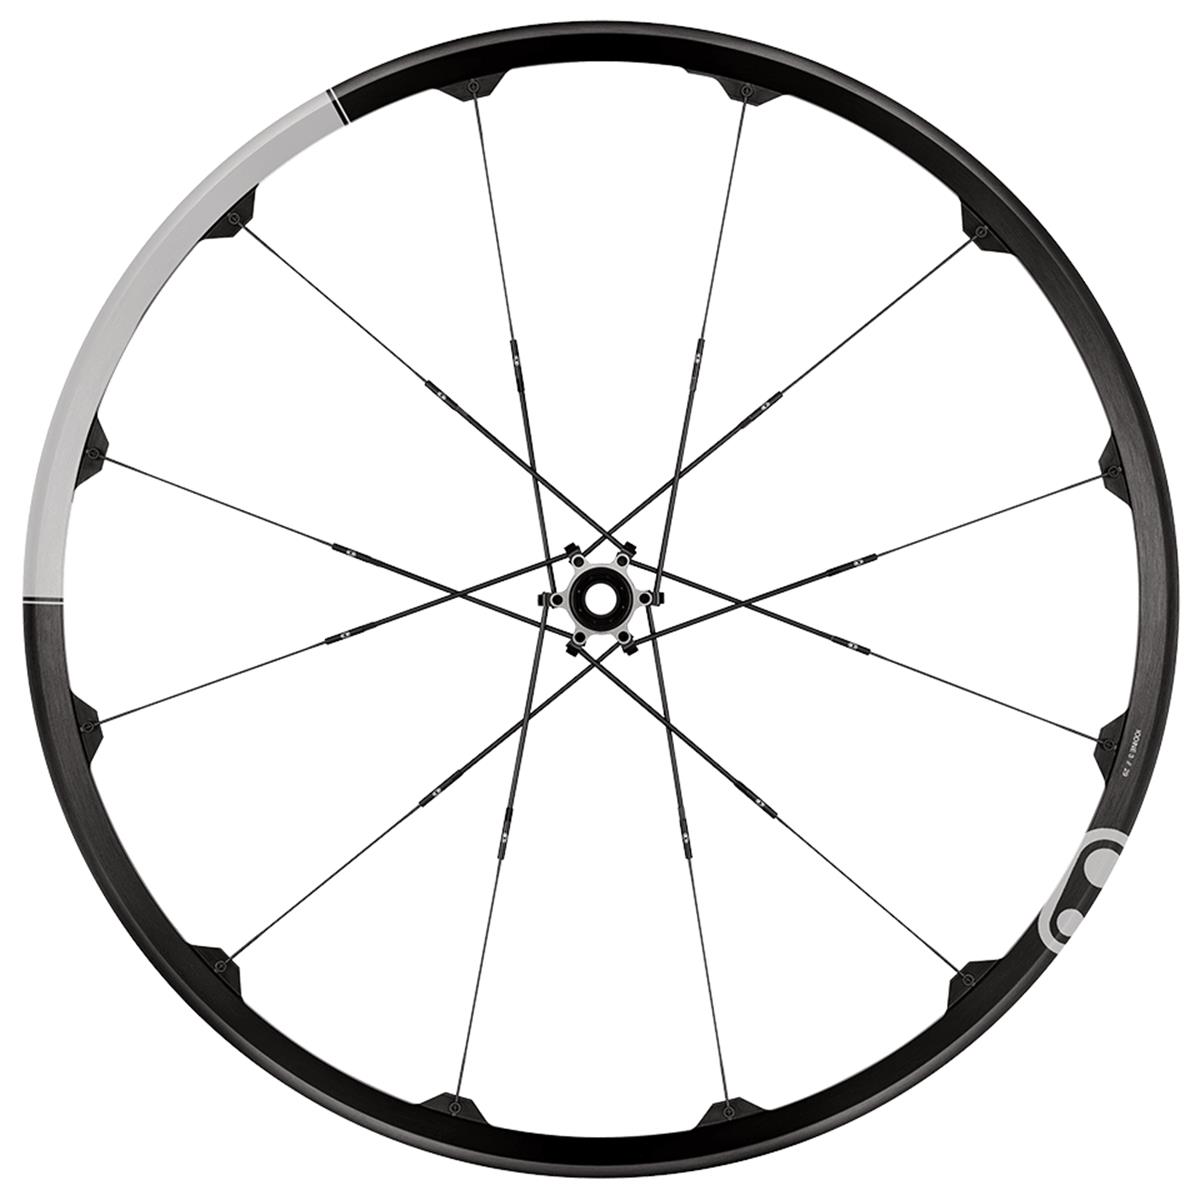 Crankbrothers Wheel Set Iodine 3 Black/Silver, 29 Inch, 15x110 mm/12x148 mm, BOOST, Tubeless Ready